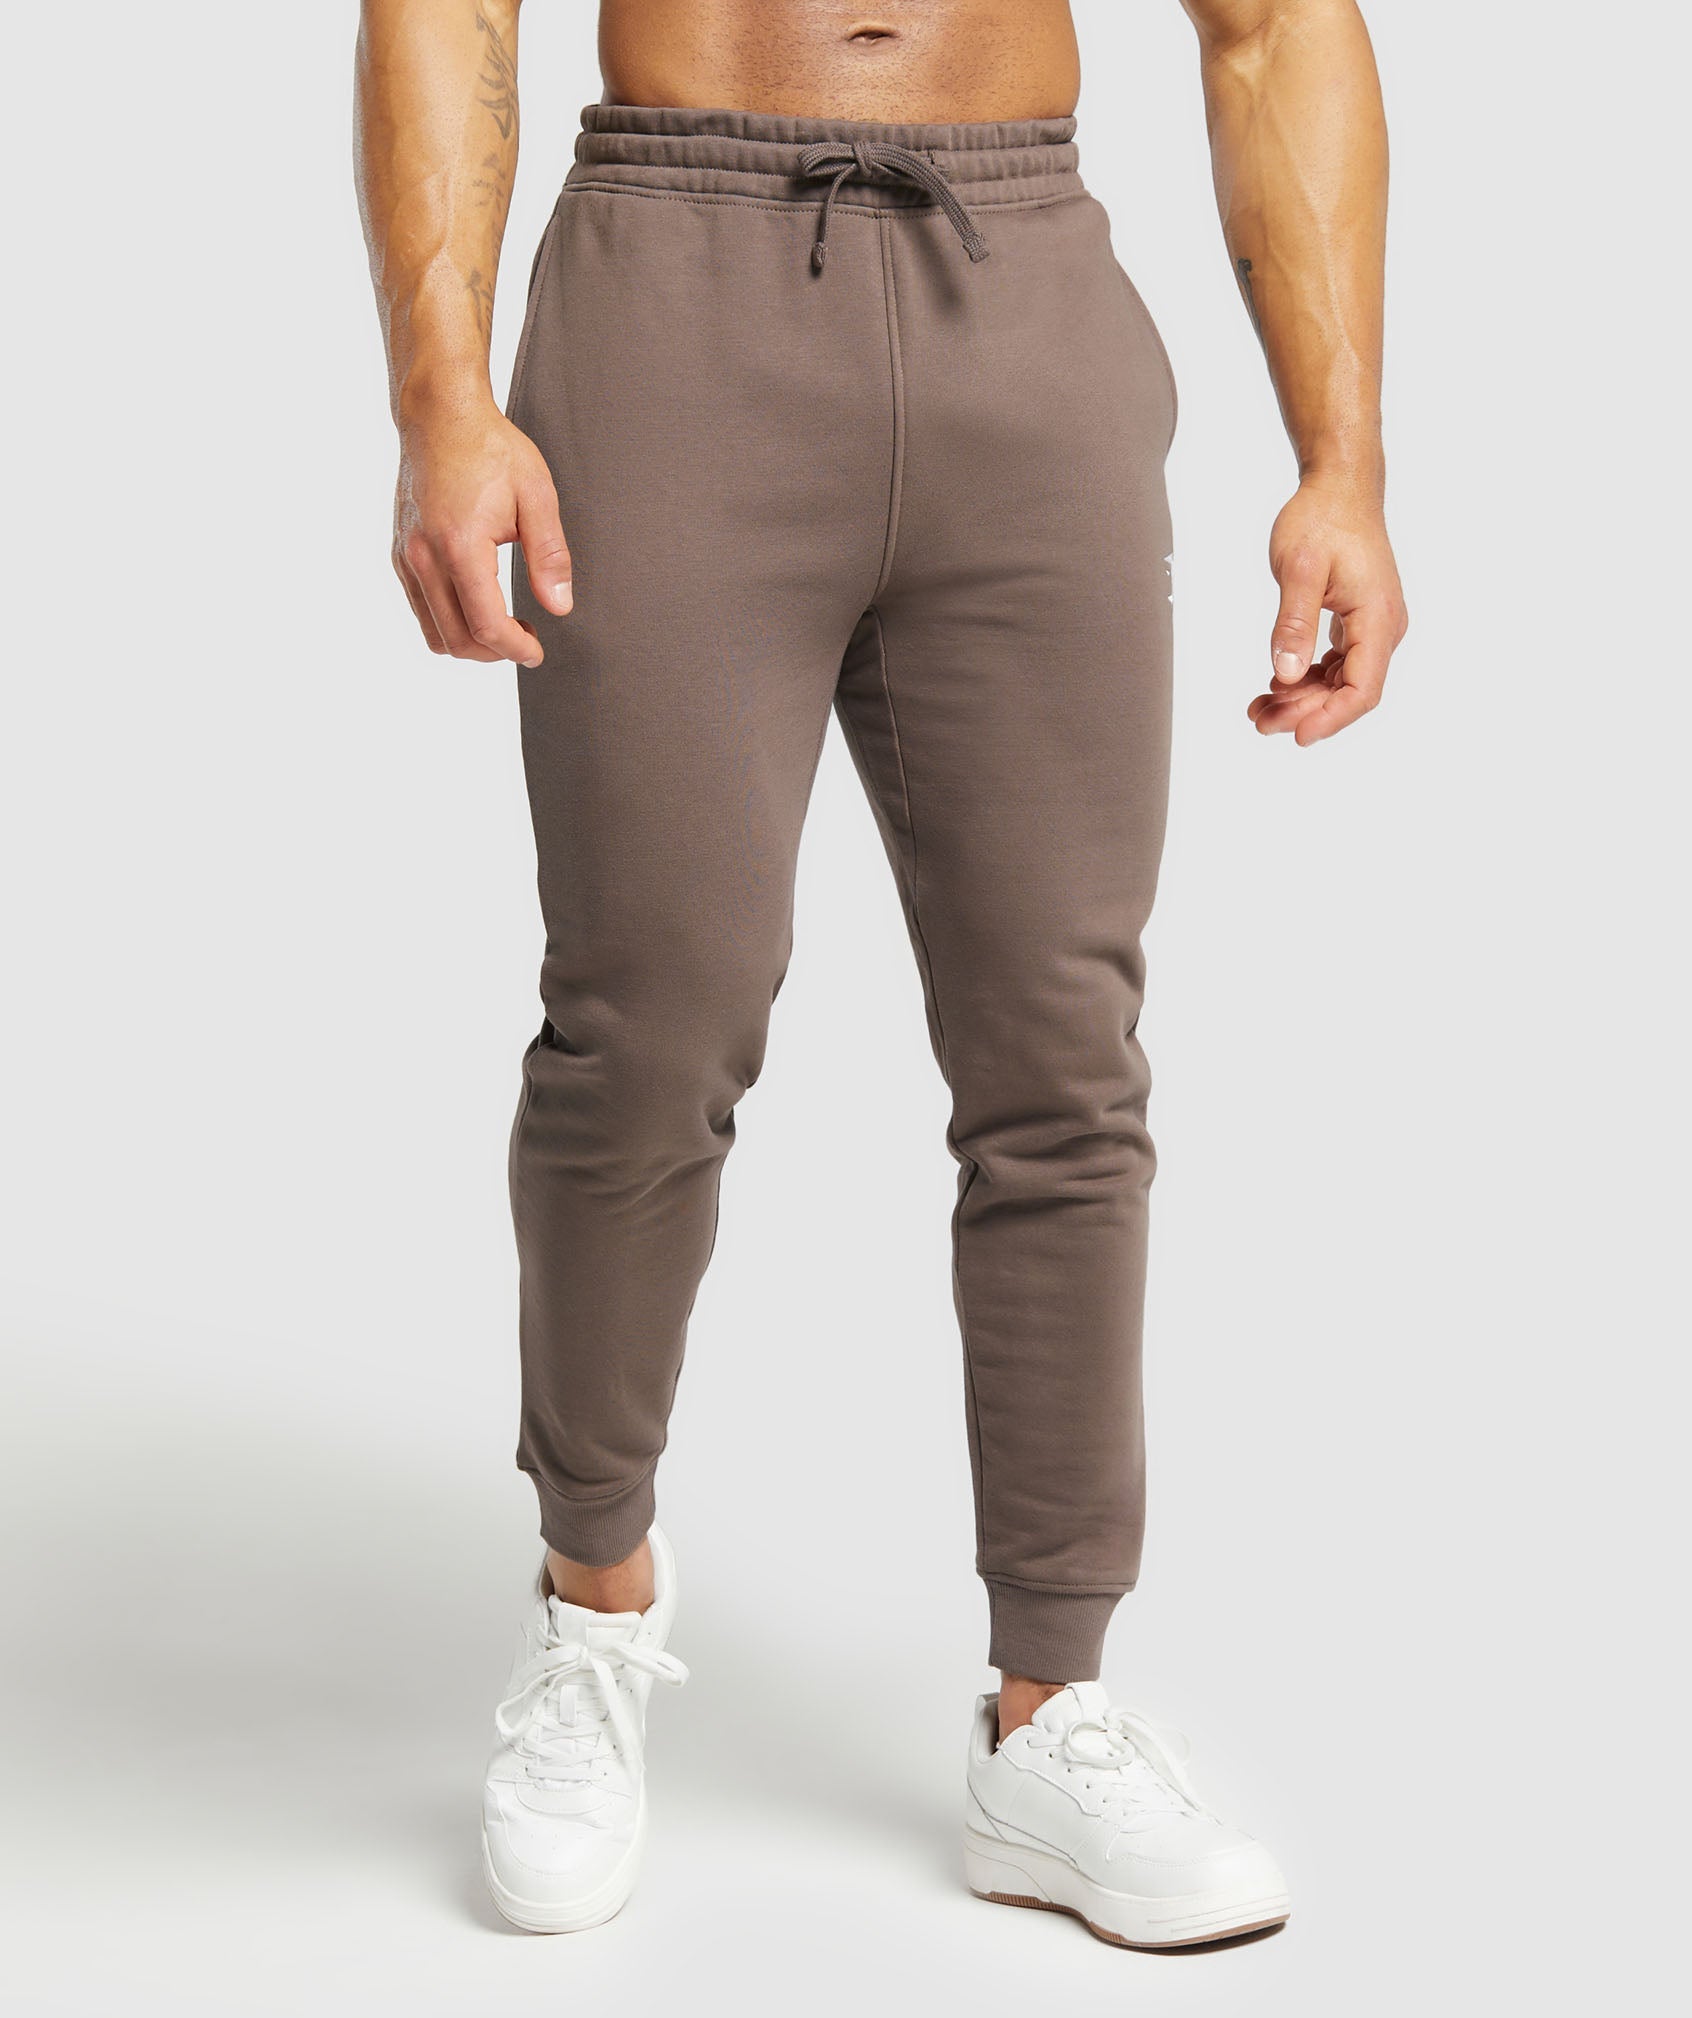 Crest Joggers in Truffle Brown - view 1